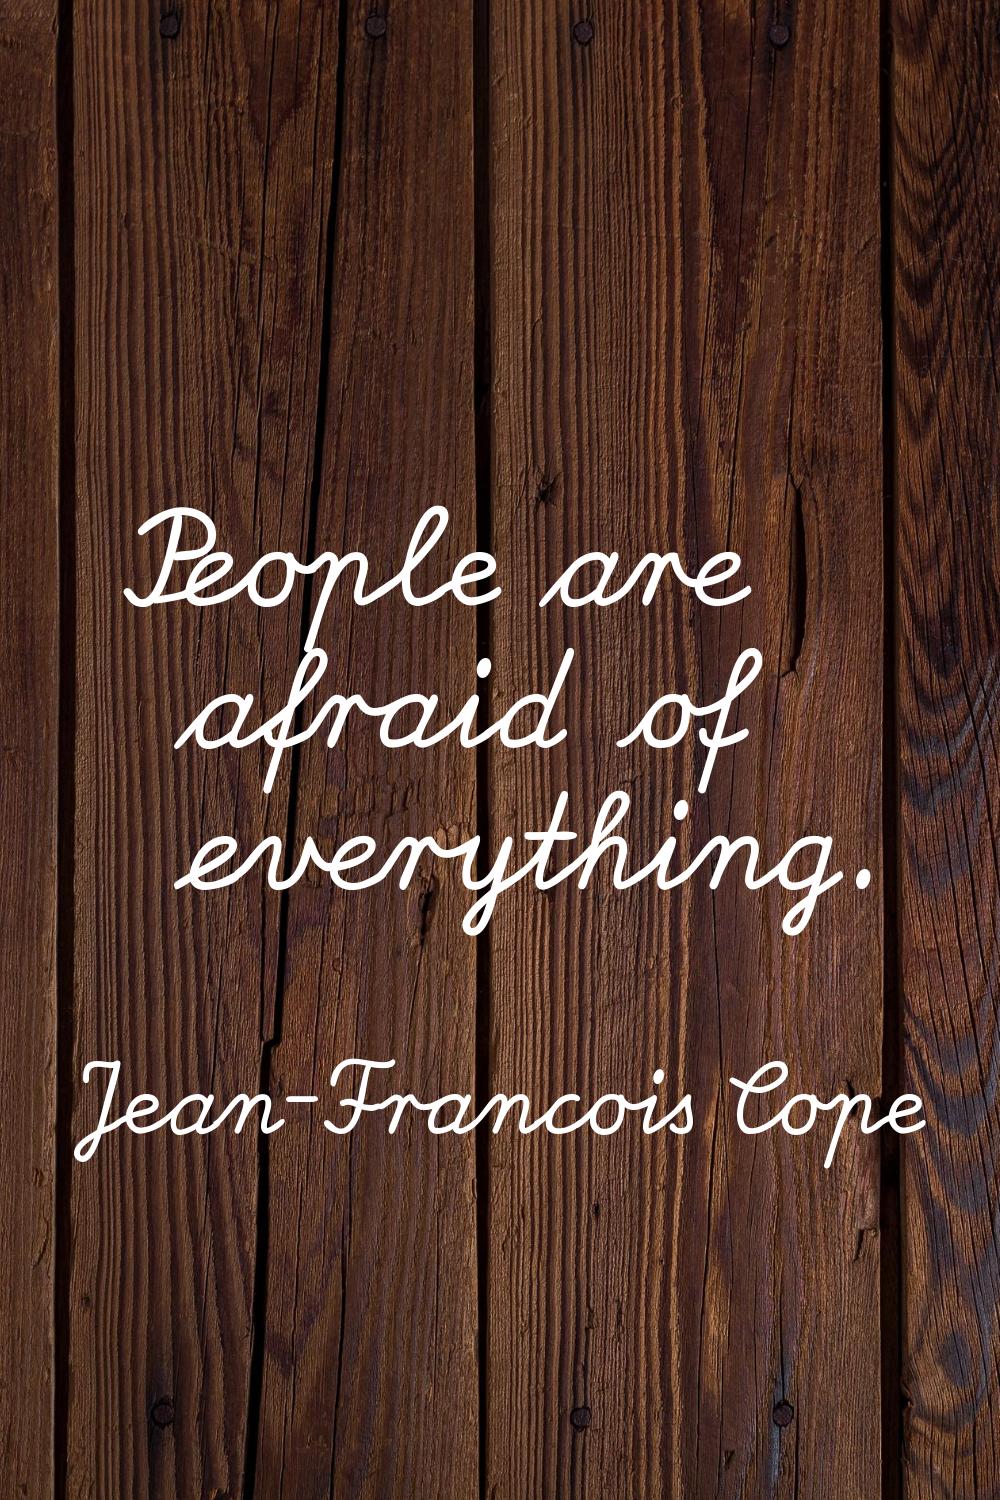 People are afraid of everything.